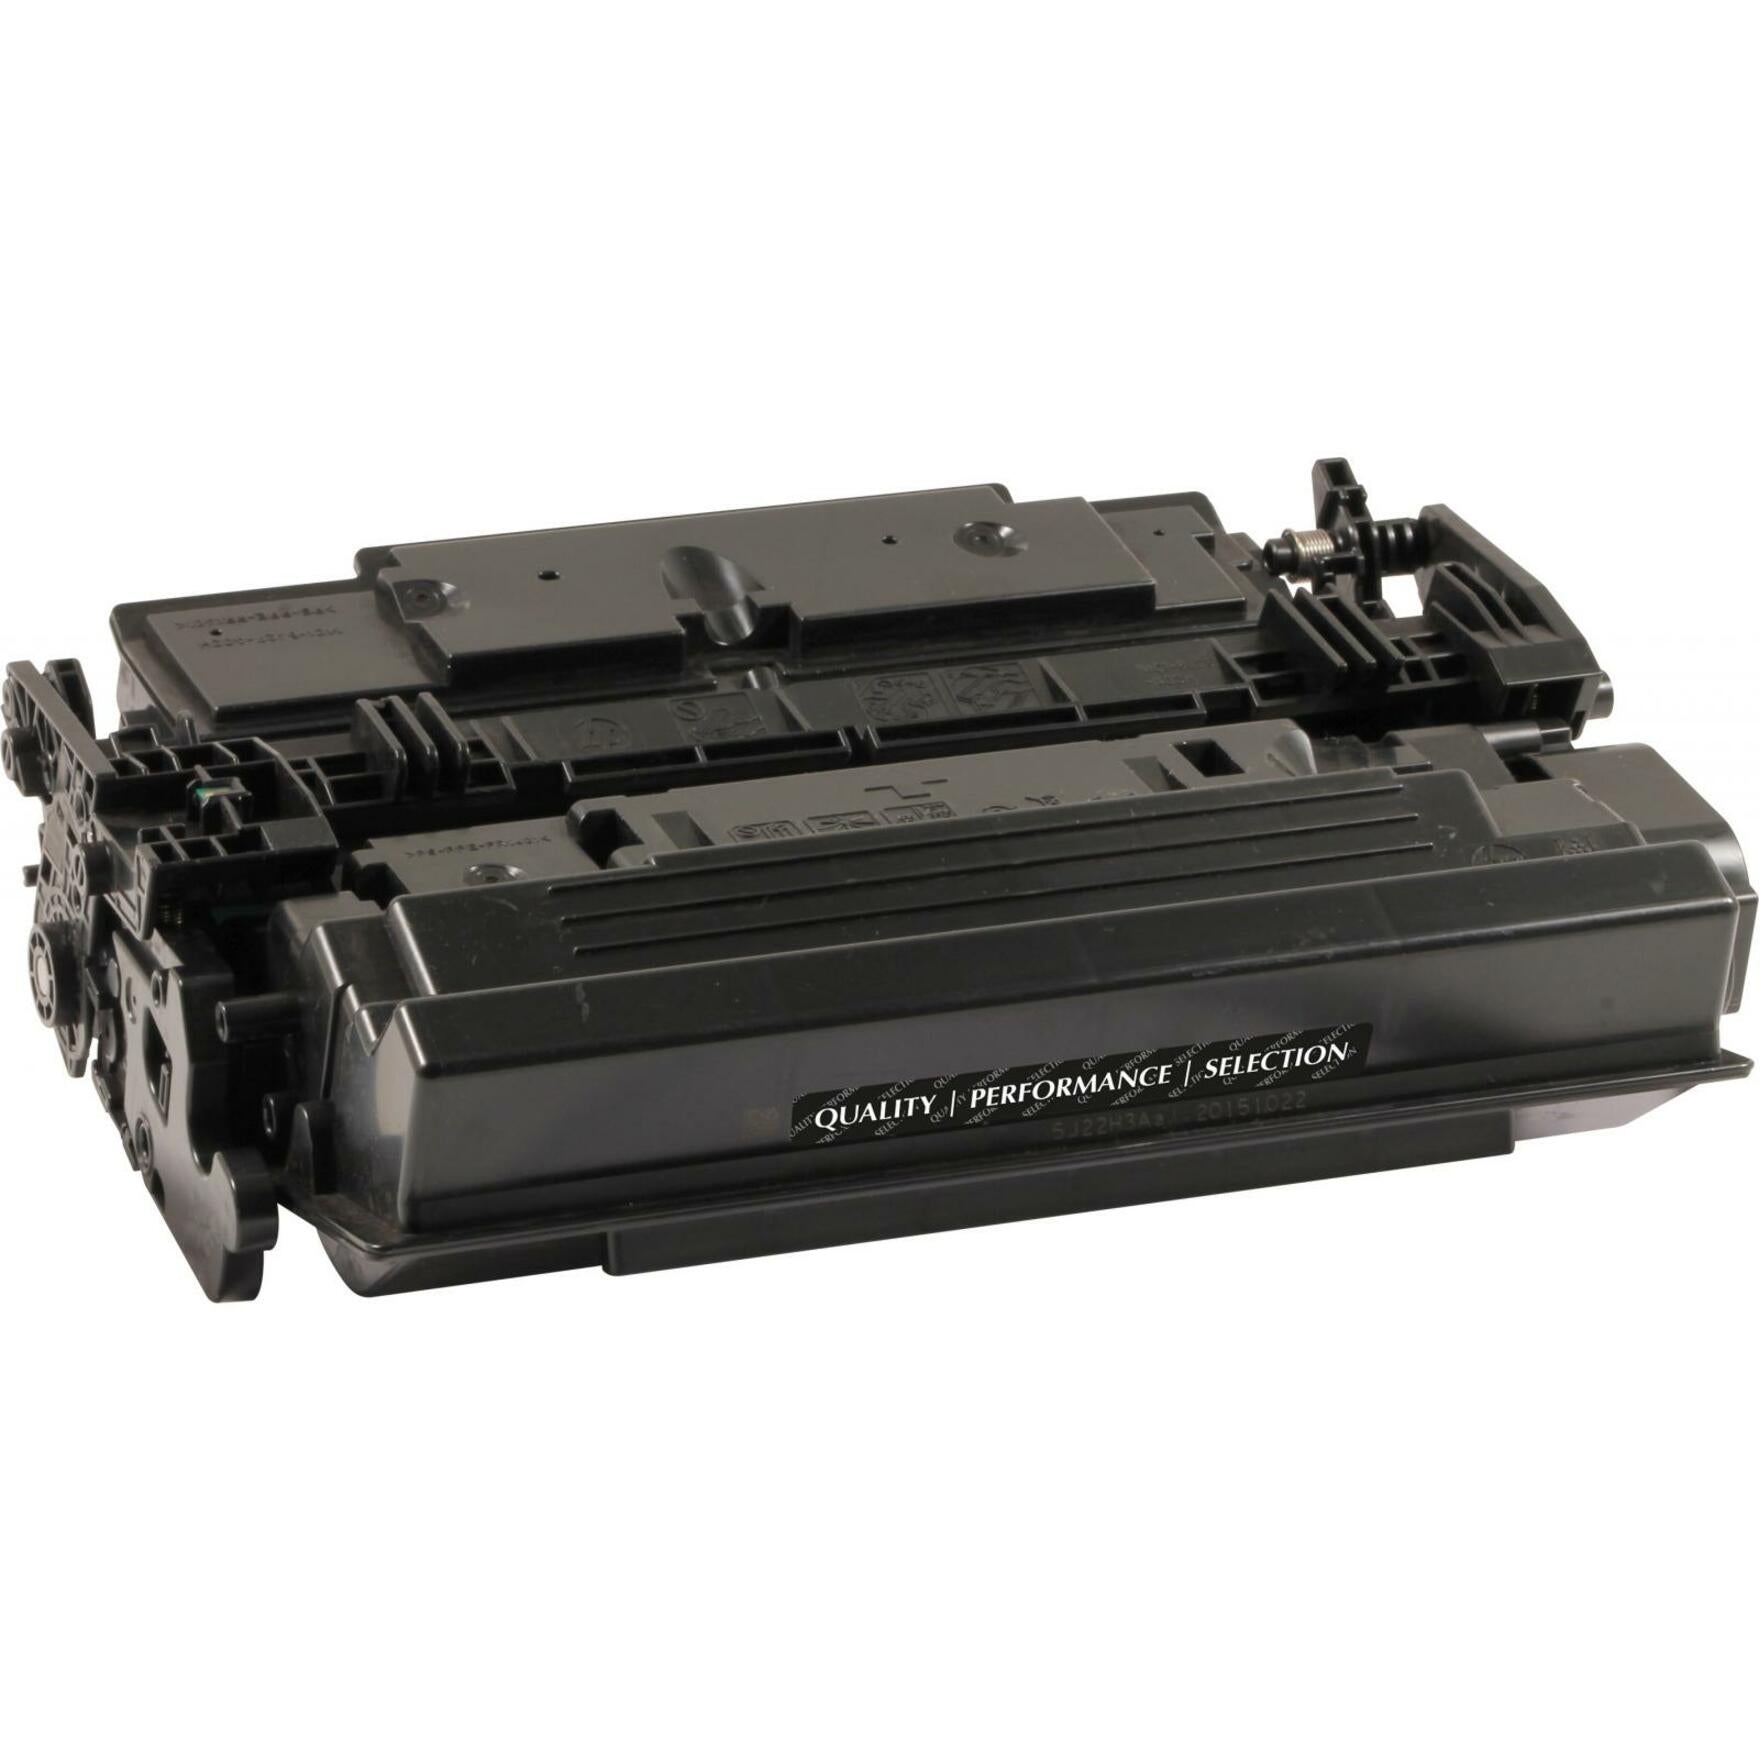 Clover Technologies 200897P Toner Cartridge, High Yield, Black, 18000 Pages